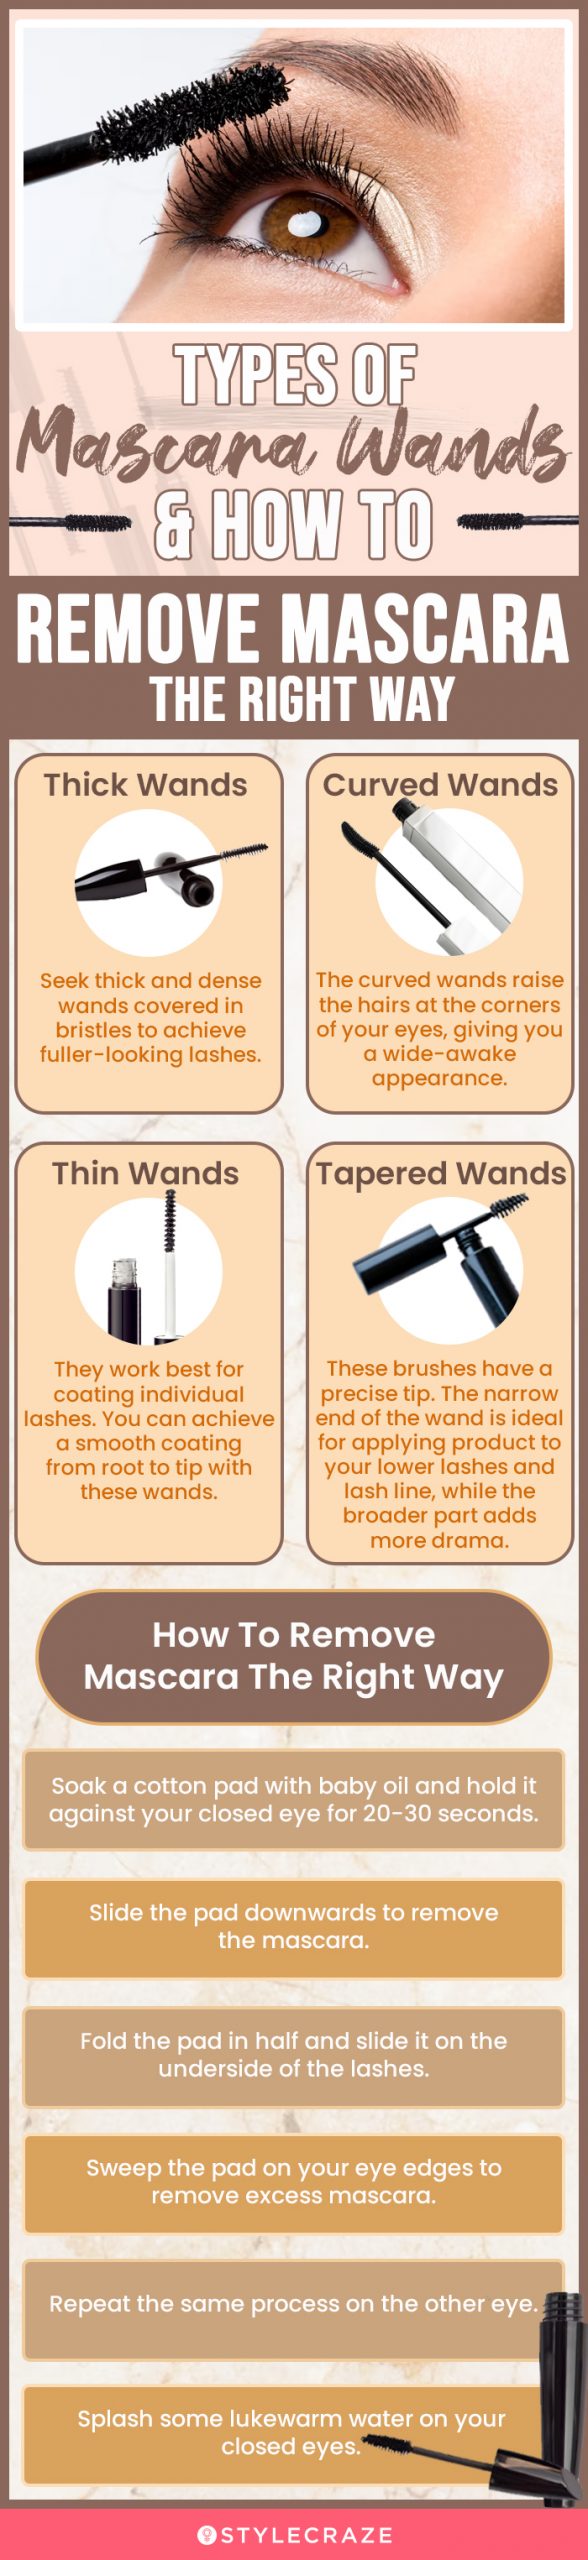  Types Of Mascara Wands & How To Remove Mascara The Right Way